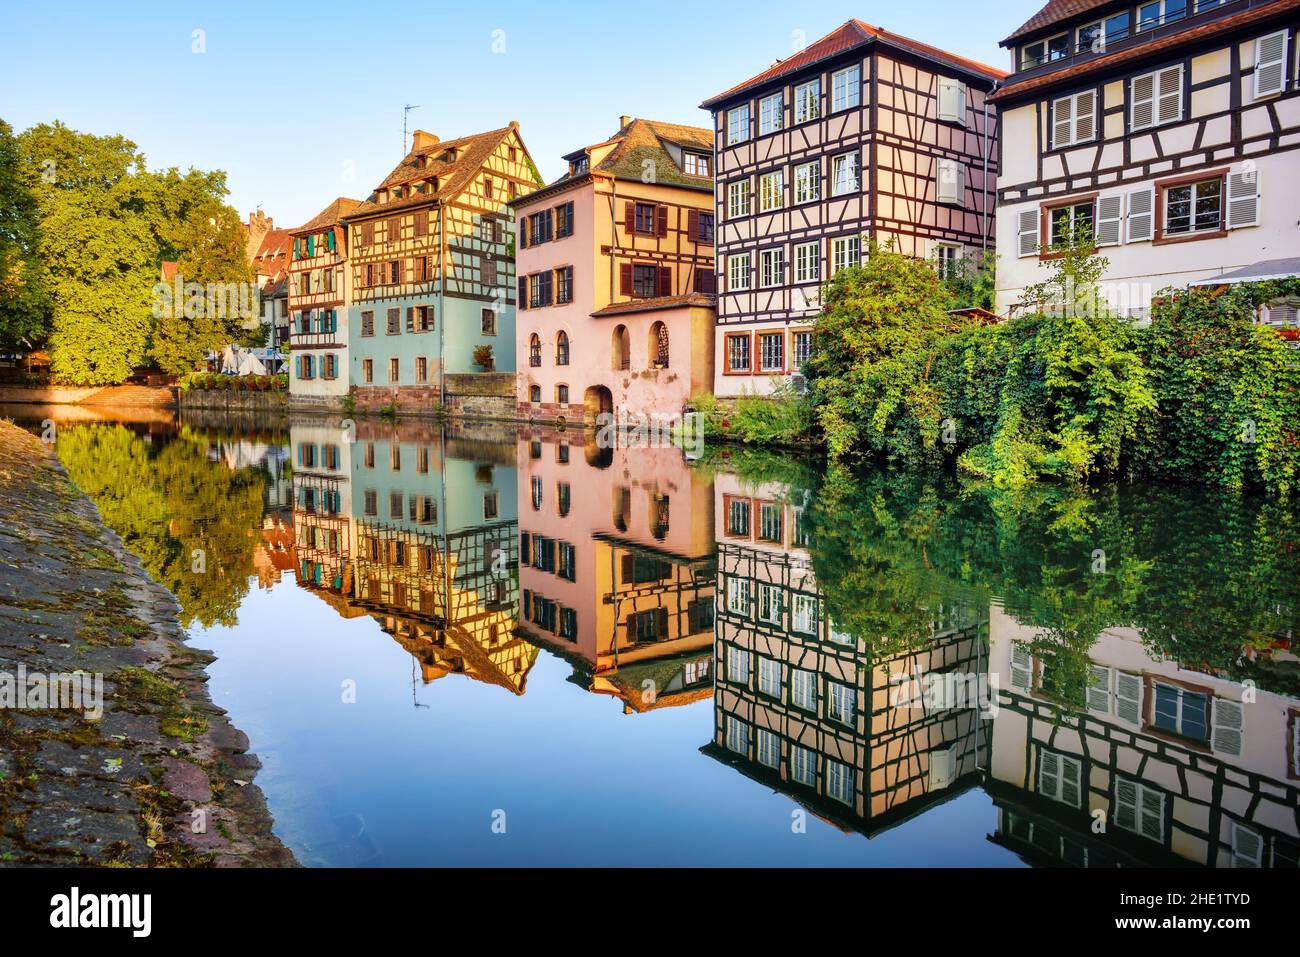 Traditional colorful half-timbered houses on Ill river in the Old town of Strasbourg city, Alsace, France Stock Photo